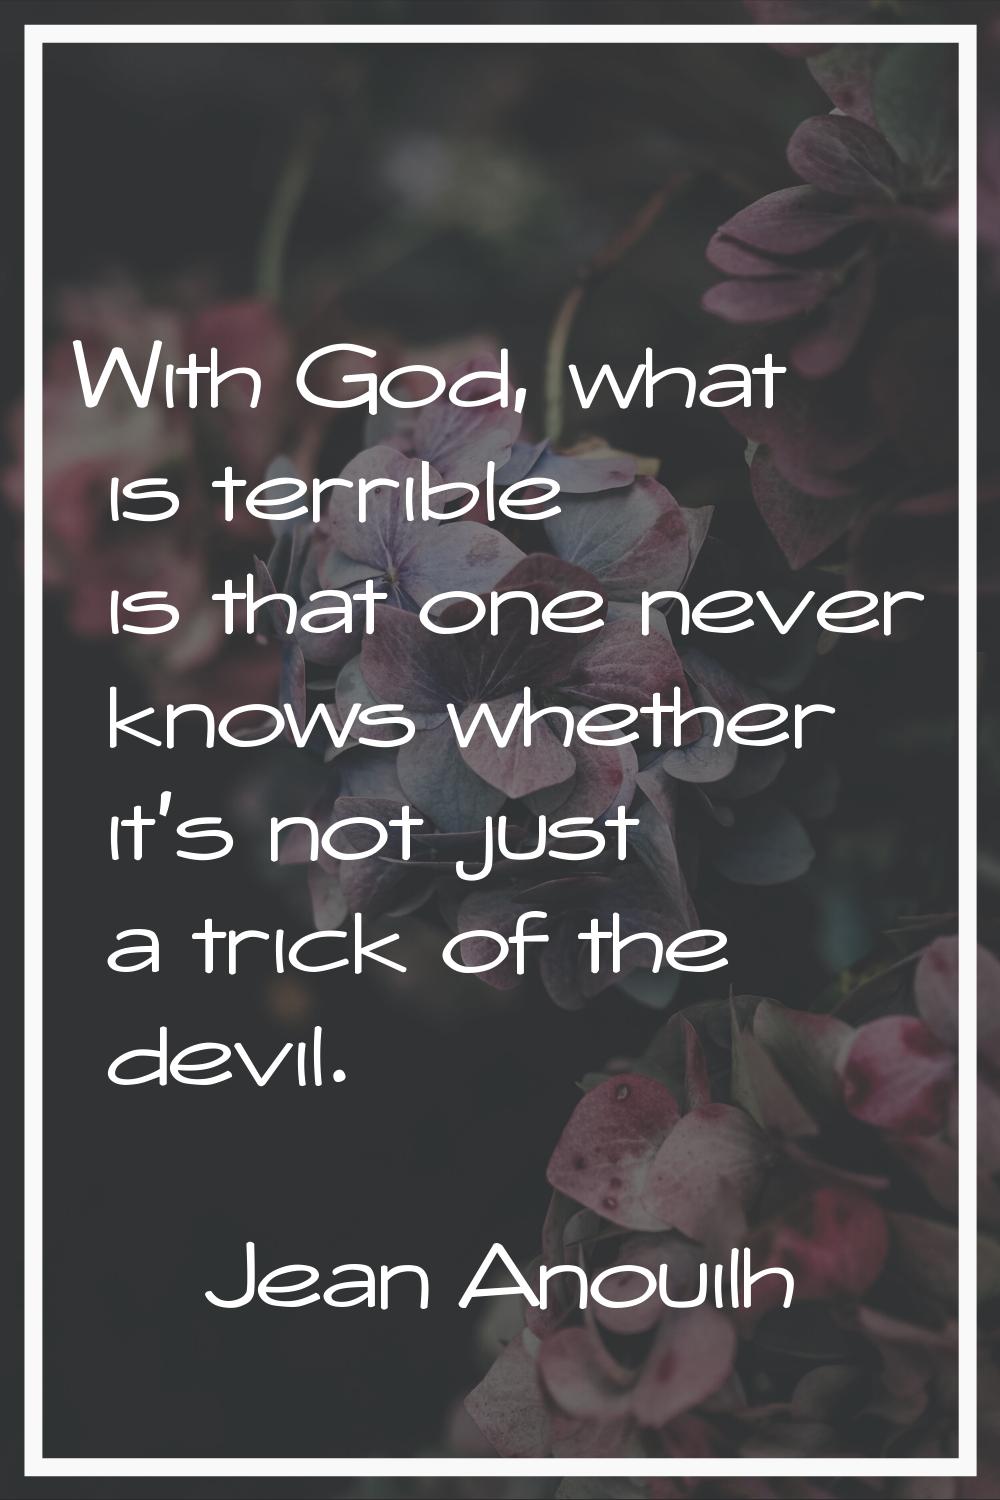 With God, what is terrible is that one never knows whether it's not just a trick of the devil.